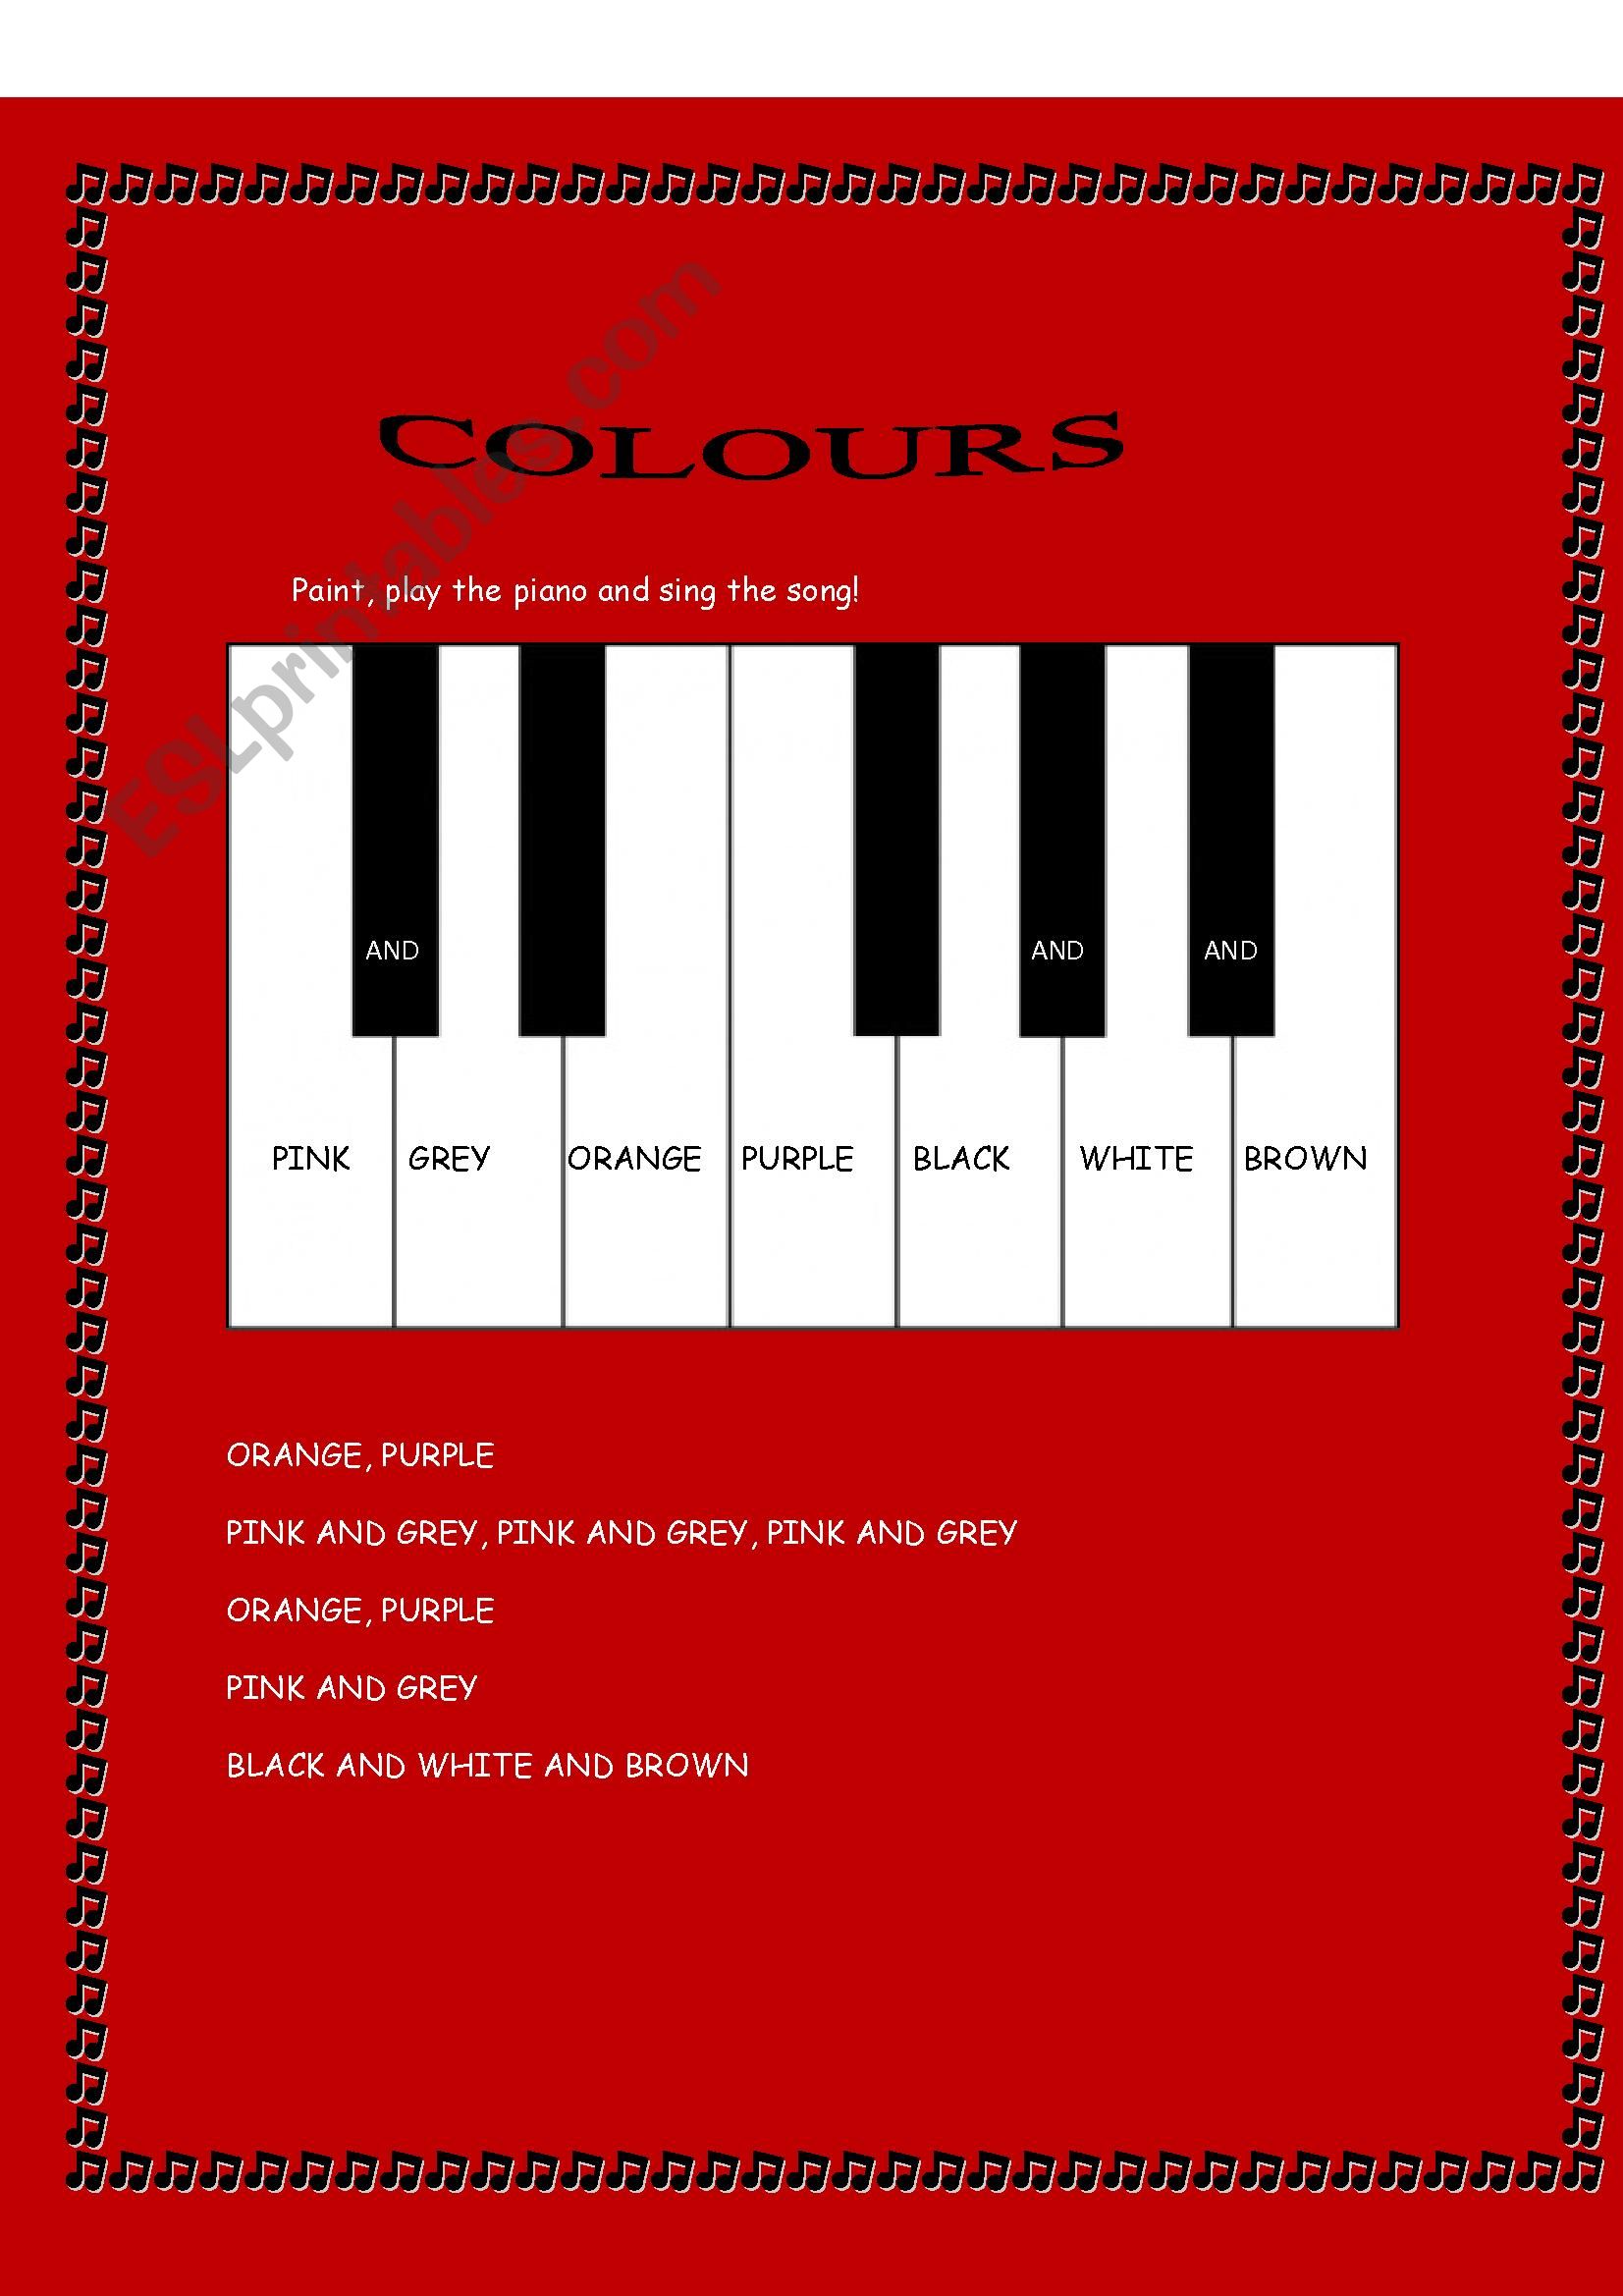  THE COLOURS SONG 2 worksheet